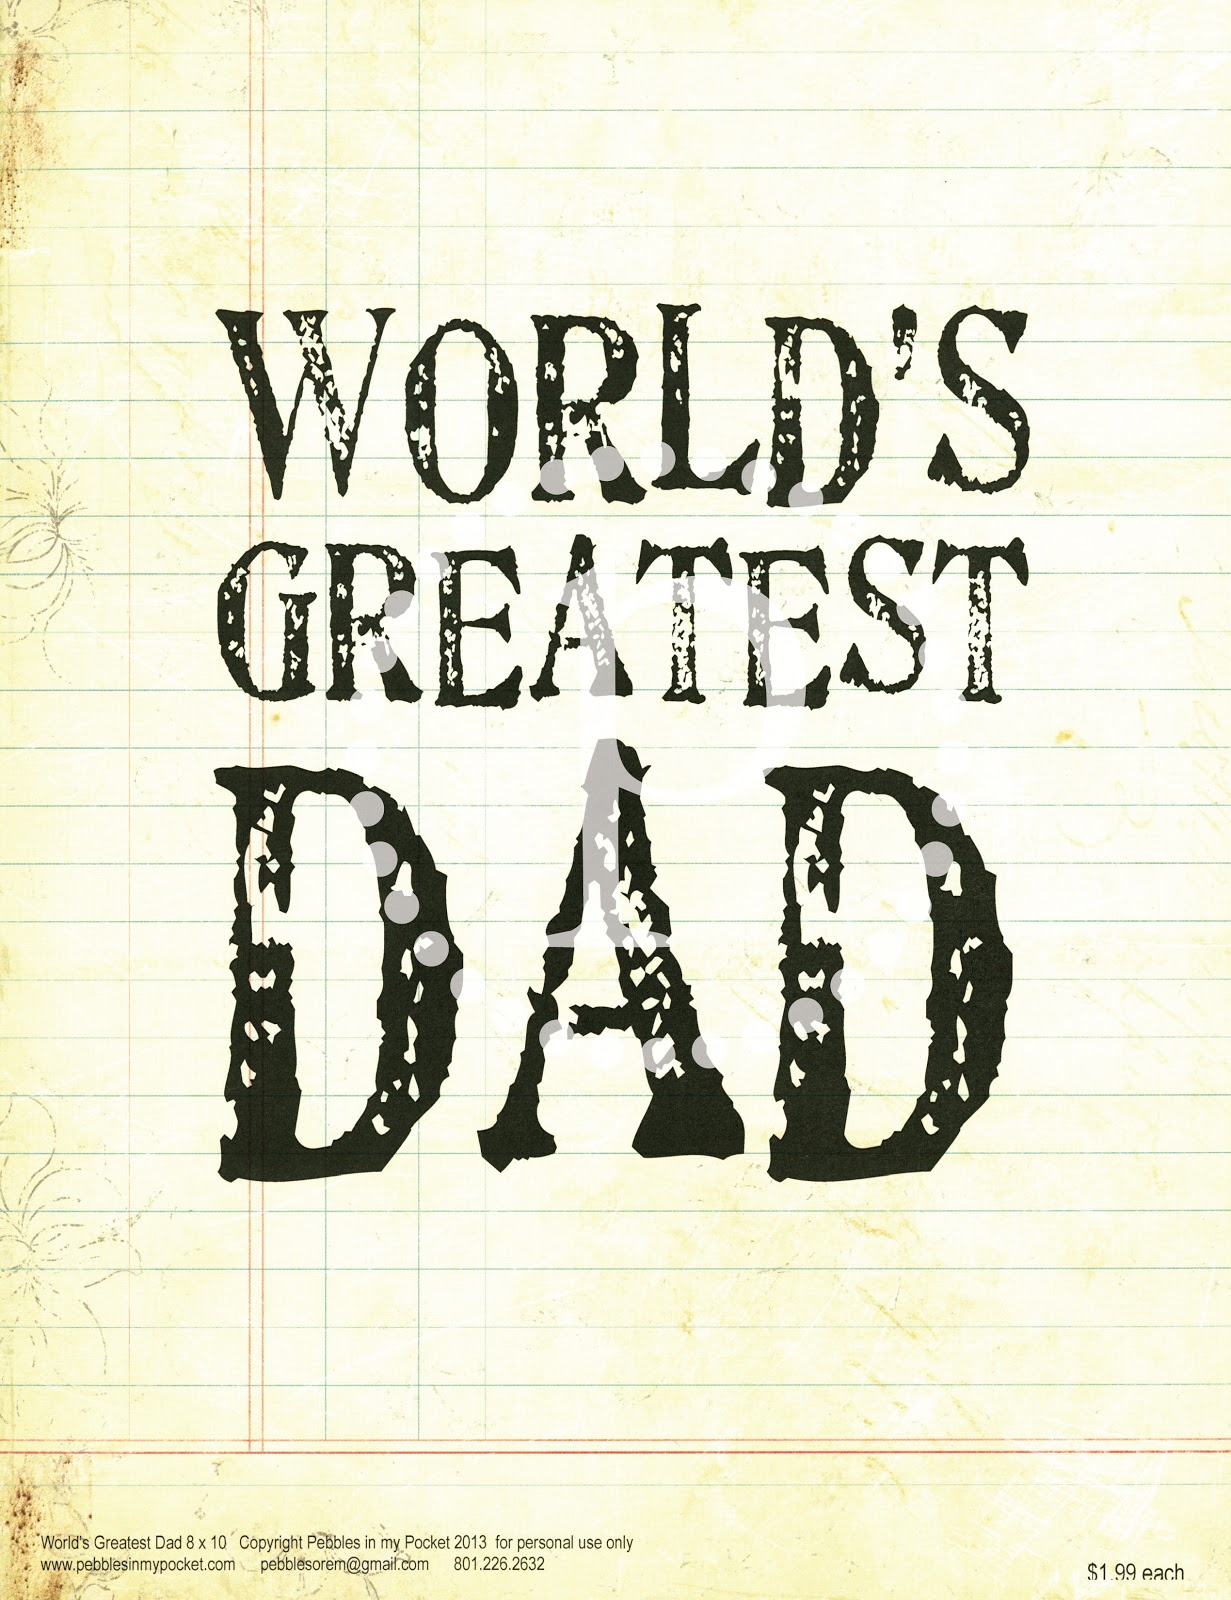 Fathers Day quotes. Hels Greatest dad. My dad is. Best dad!. Hell greatest dad lyrics